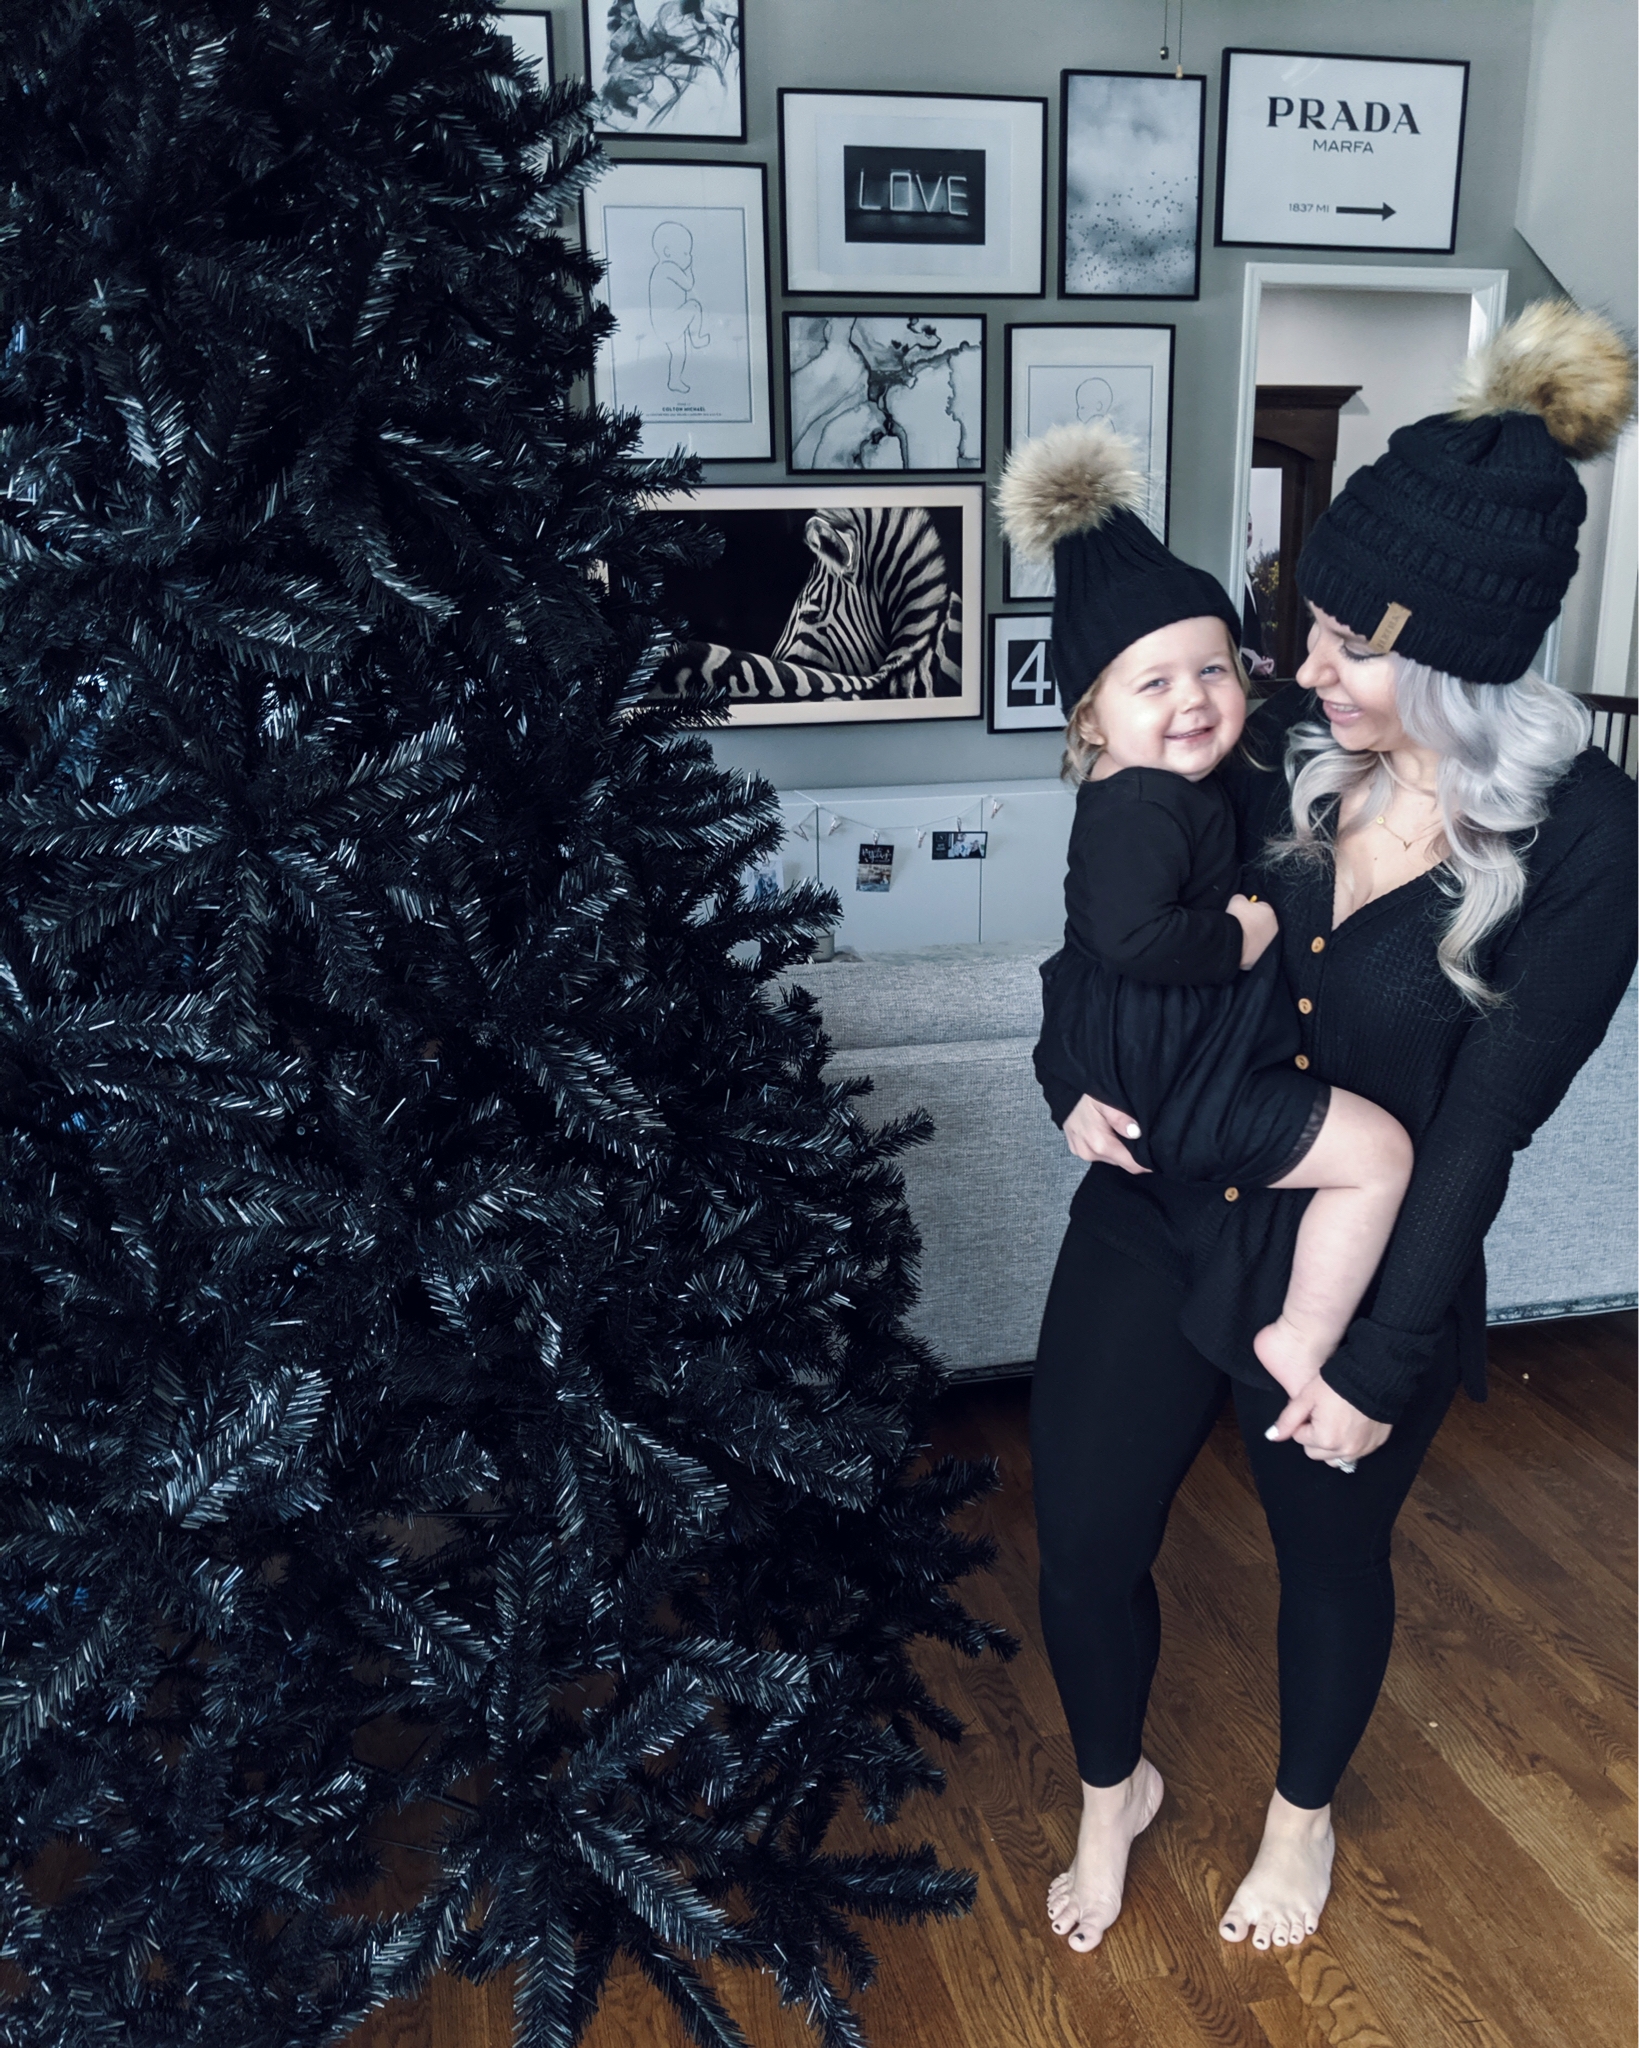 Black Christmas Tree - Modern Christmas Decor: A black Christmas tree is sophisticated, stylish, and unexpected. See how to decorate a black Christmas tree for modern Christmas decor! (Sponsored by Wayfair). #modernhome #christmasdecor #christmastree